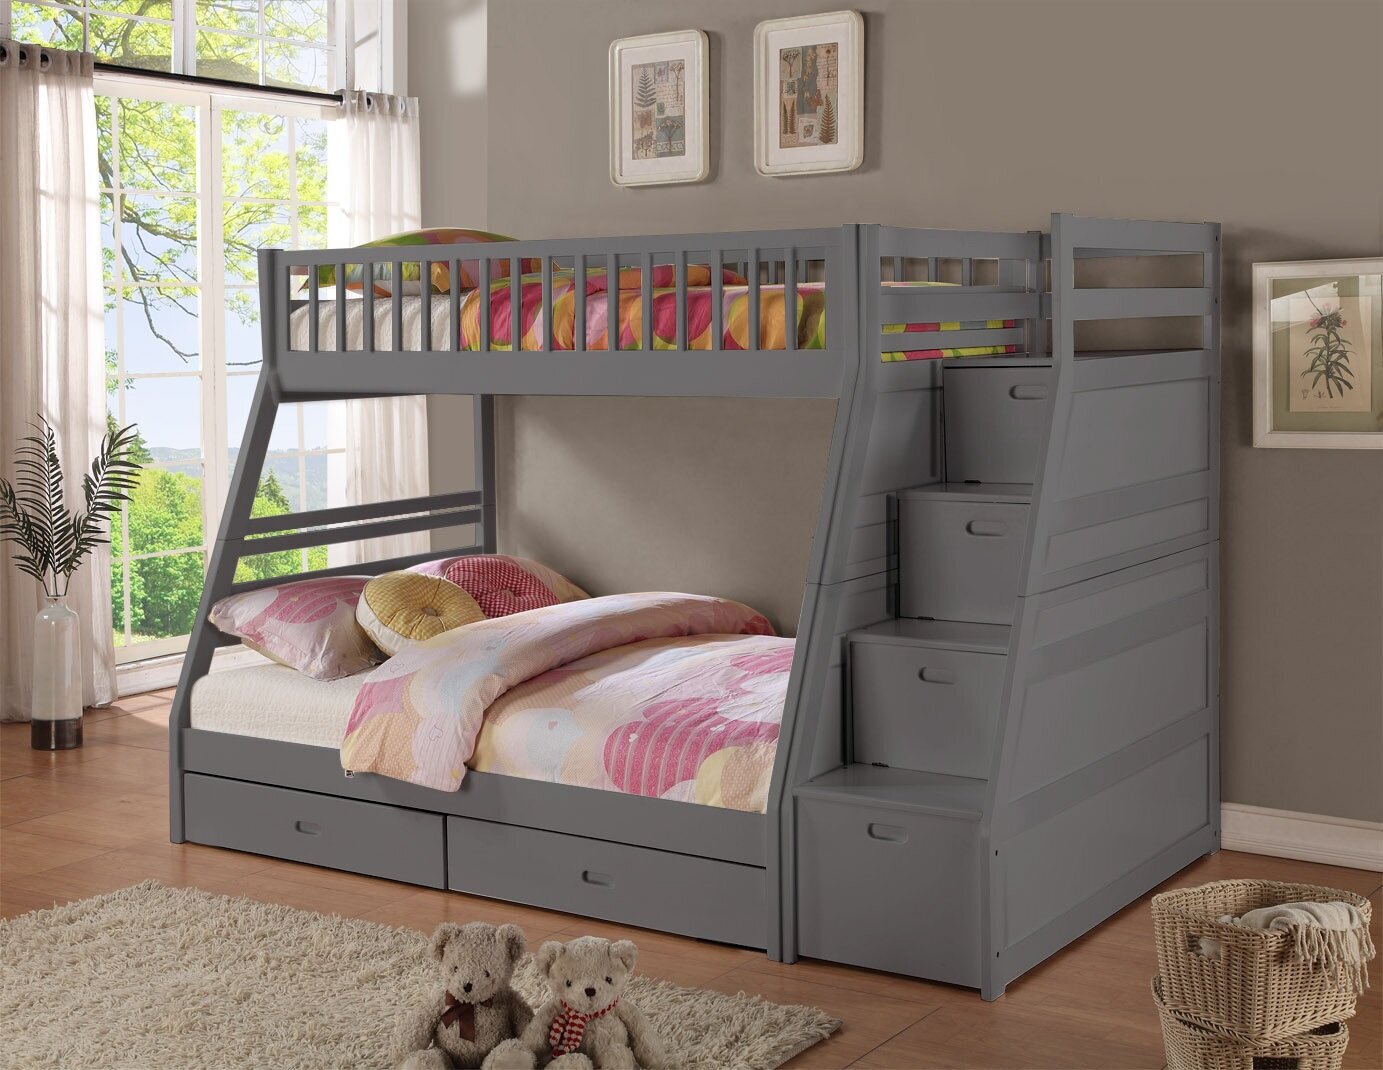 Stairstep Bunk Twin Full Bed, Furniture Warehouse Bunk Beds